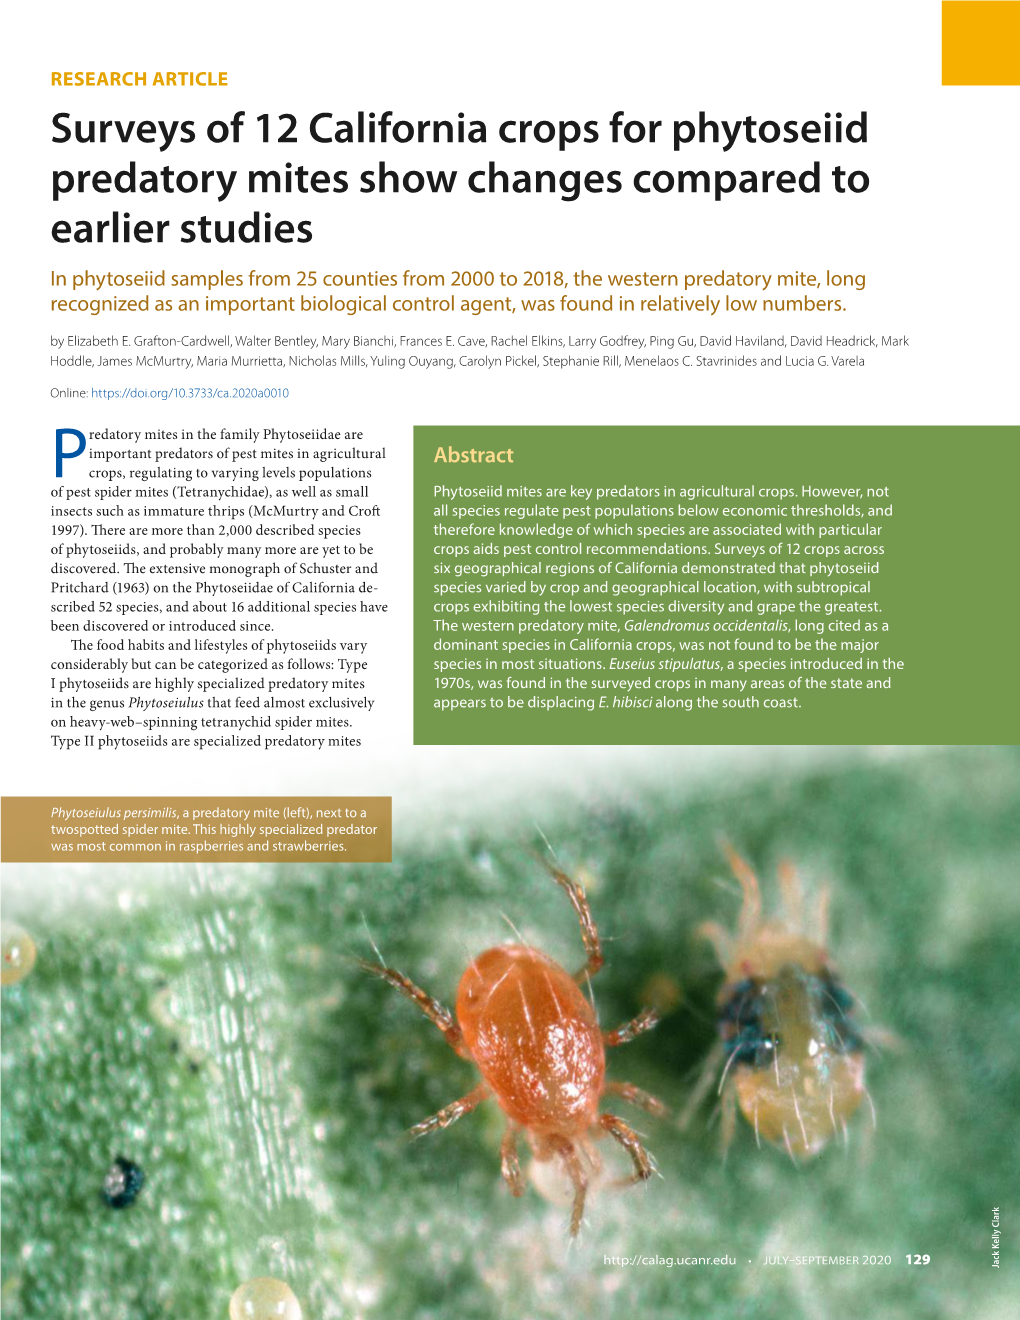 Surveys of 12 California Crops for Phytoseiid Predatory Mites Show Changes Compared to Earlier Studies